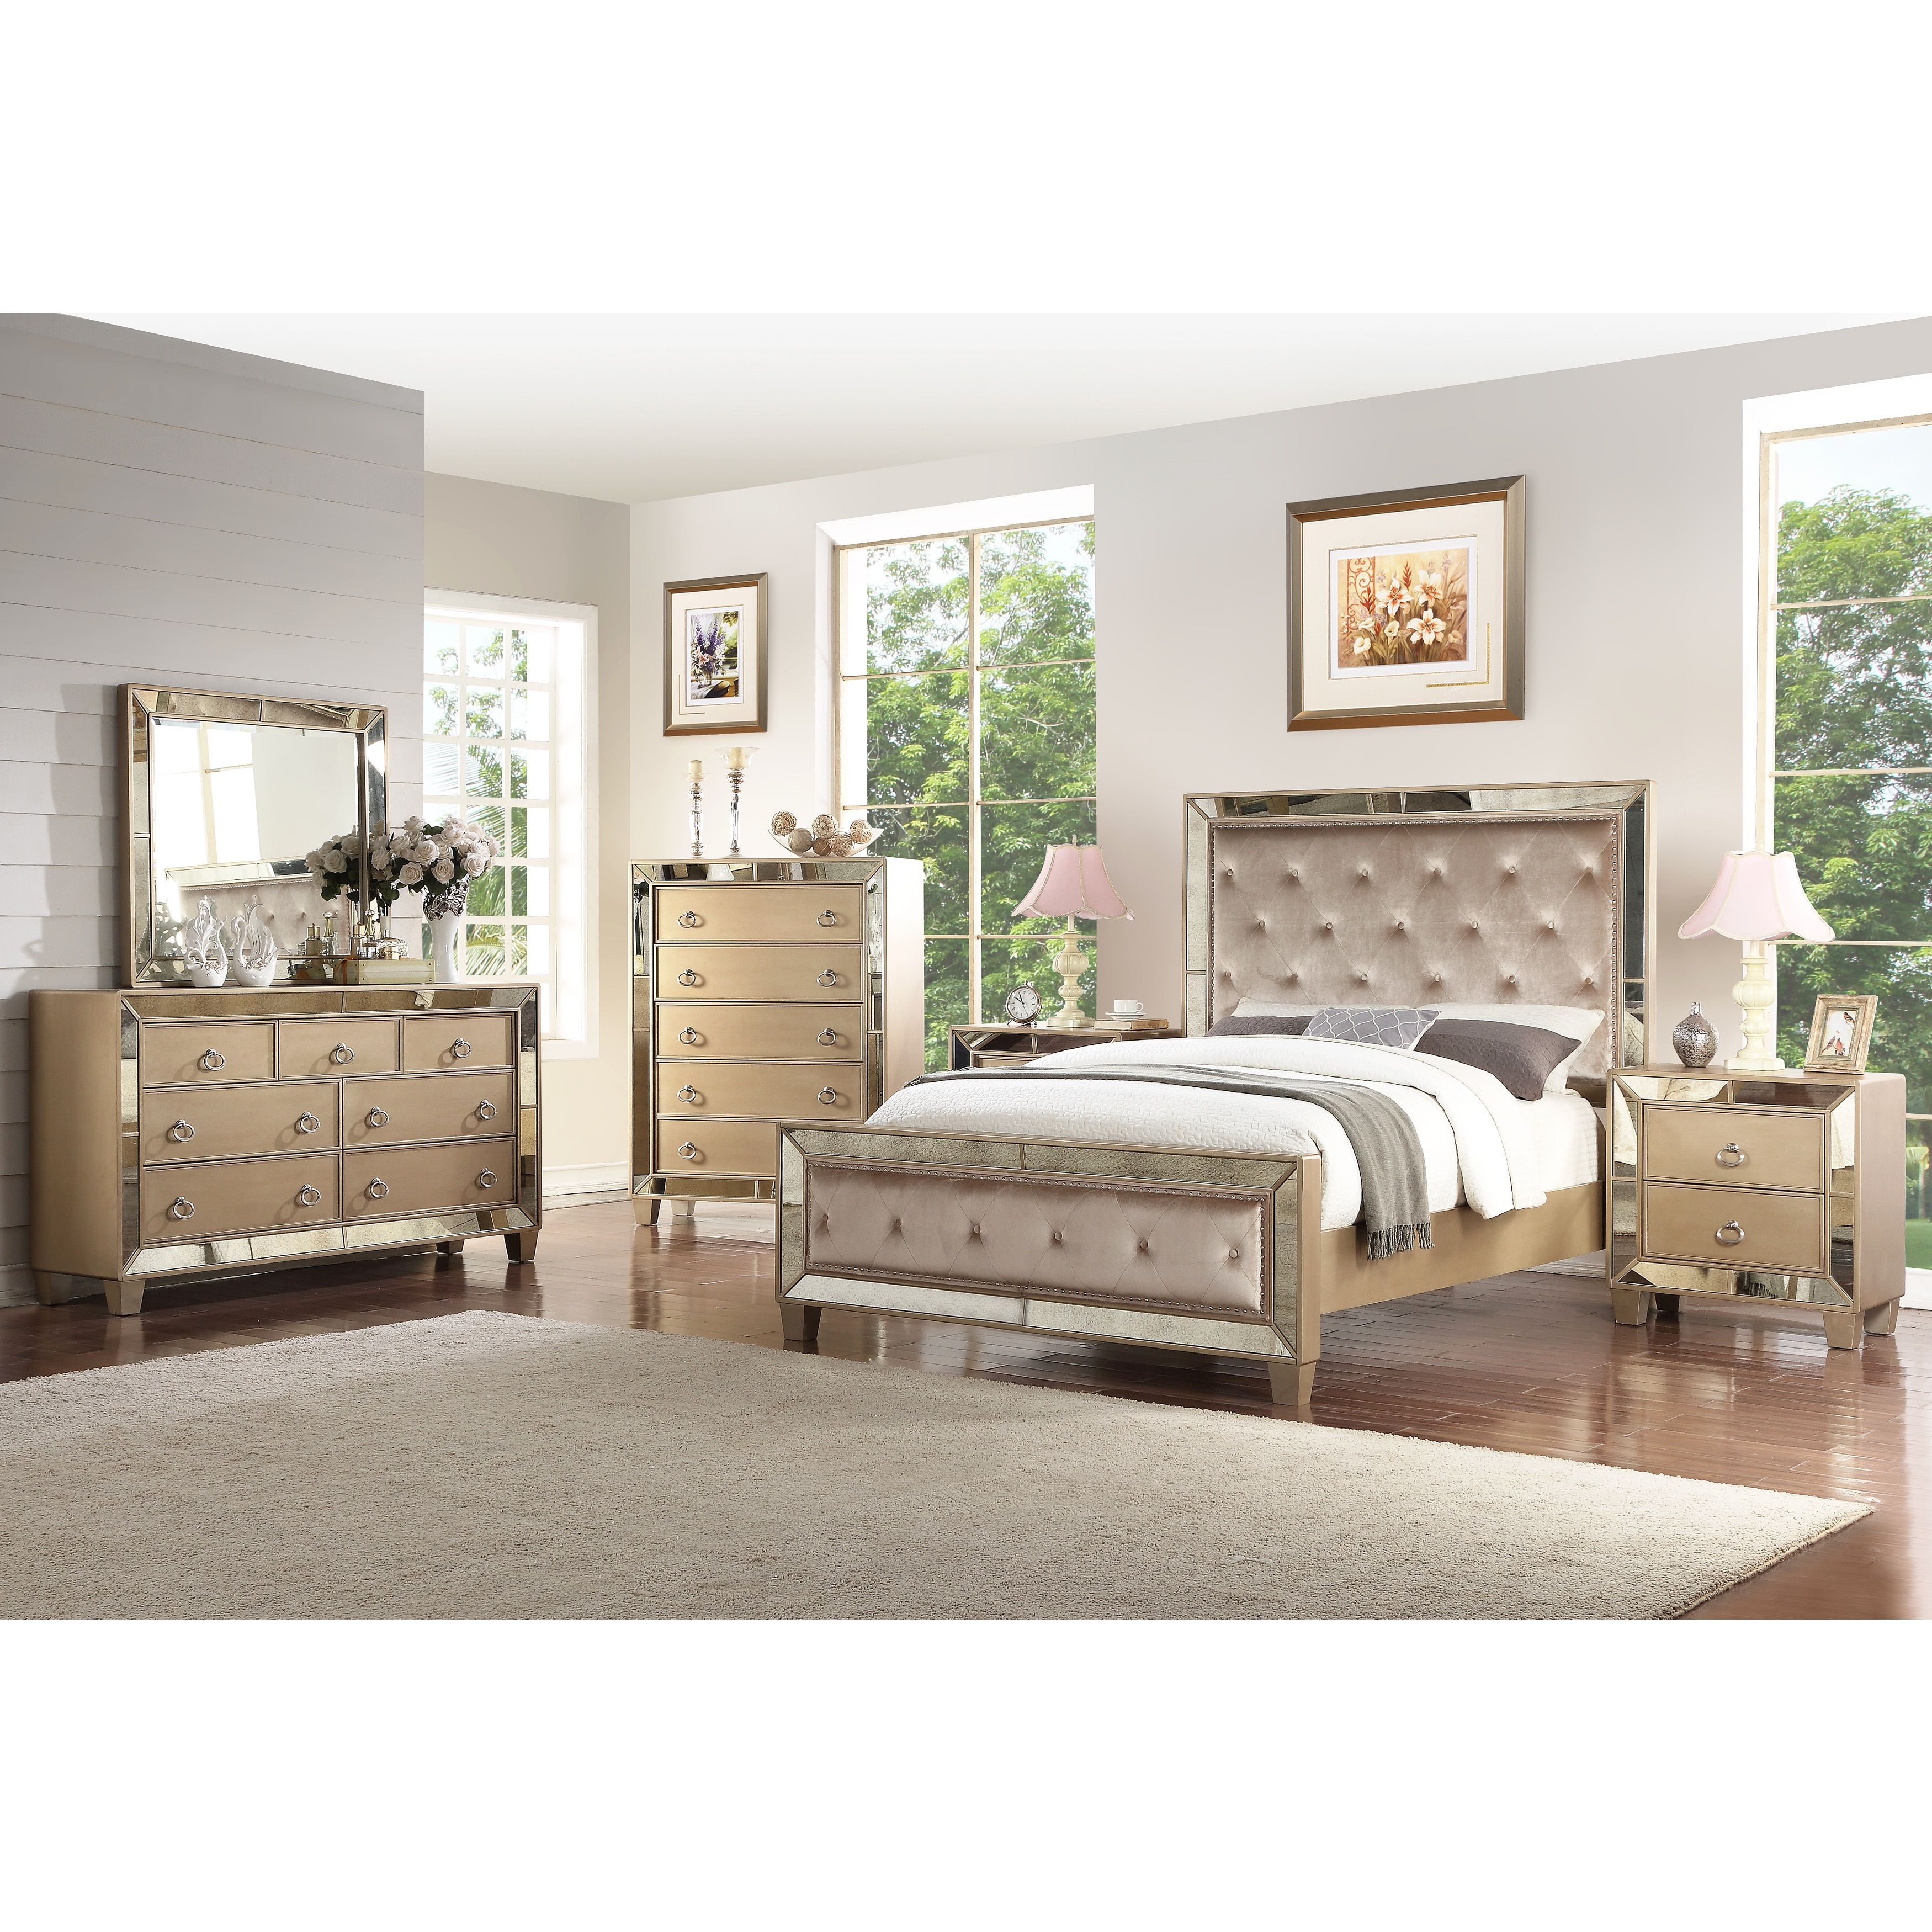 Abson Chateau Mirrored Tufted 6 Piece Bedroom Set California King within sizing 3500 X 3500